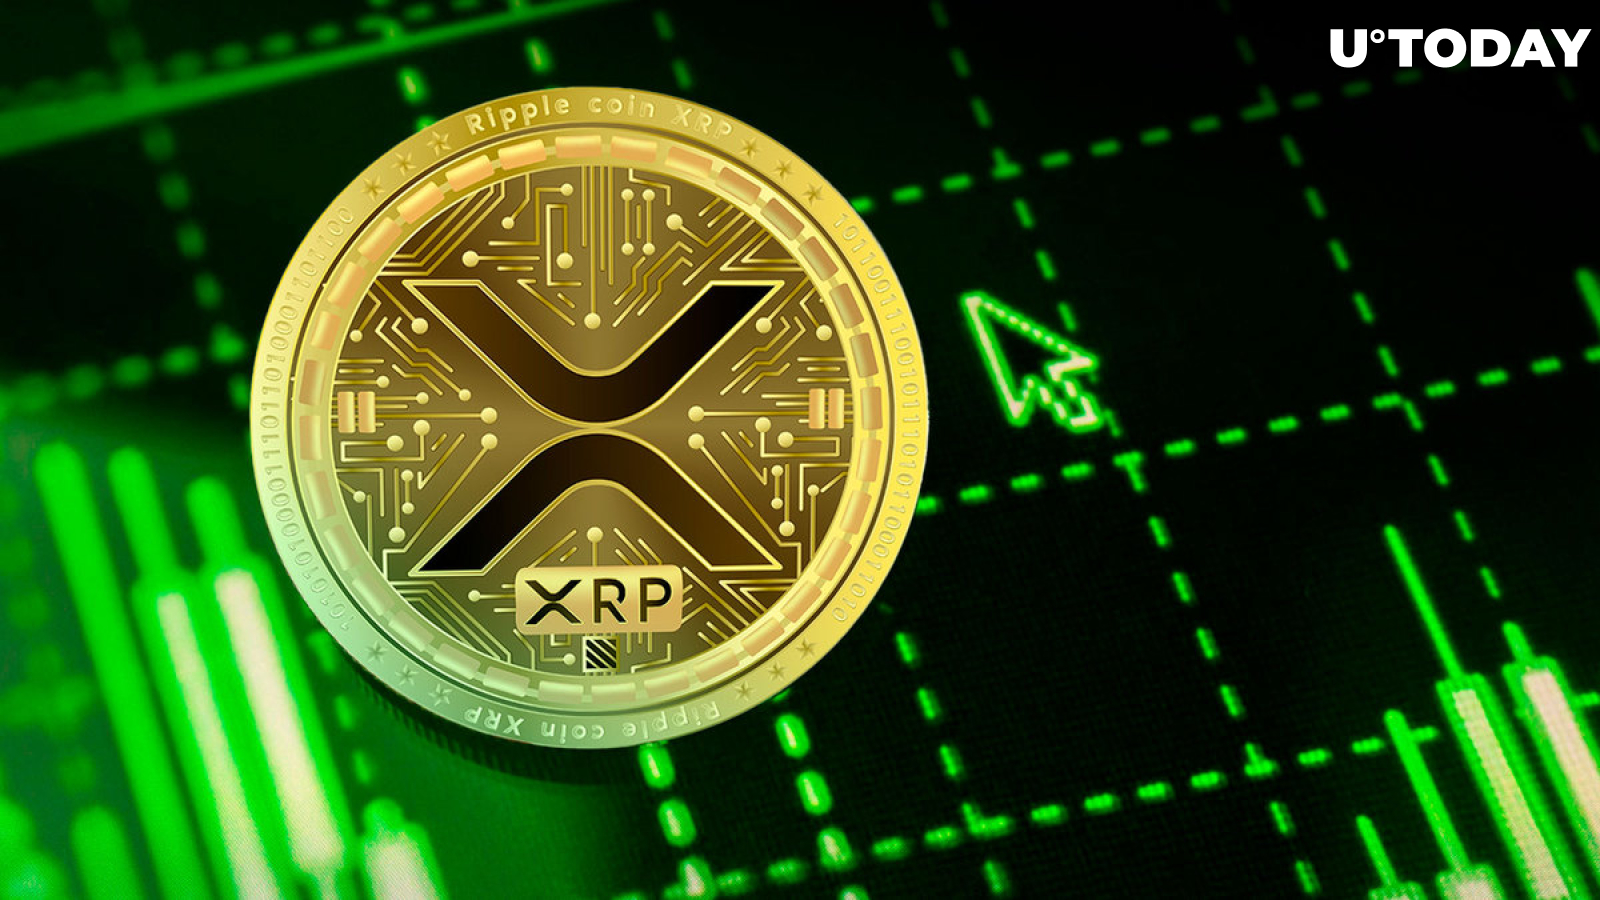 Close to Billion XRP Moved by Unknown Wallets and Ripple as Investors' Interest to XRP Remains High